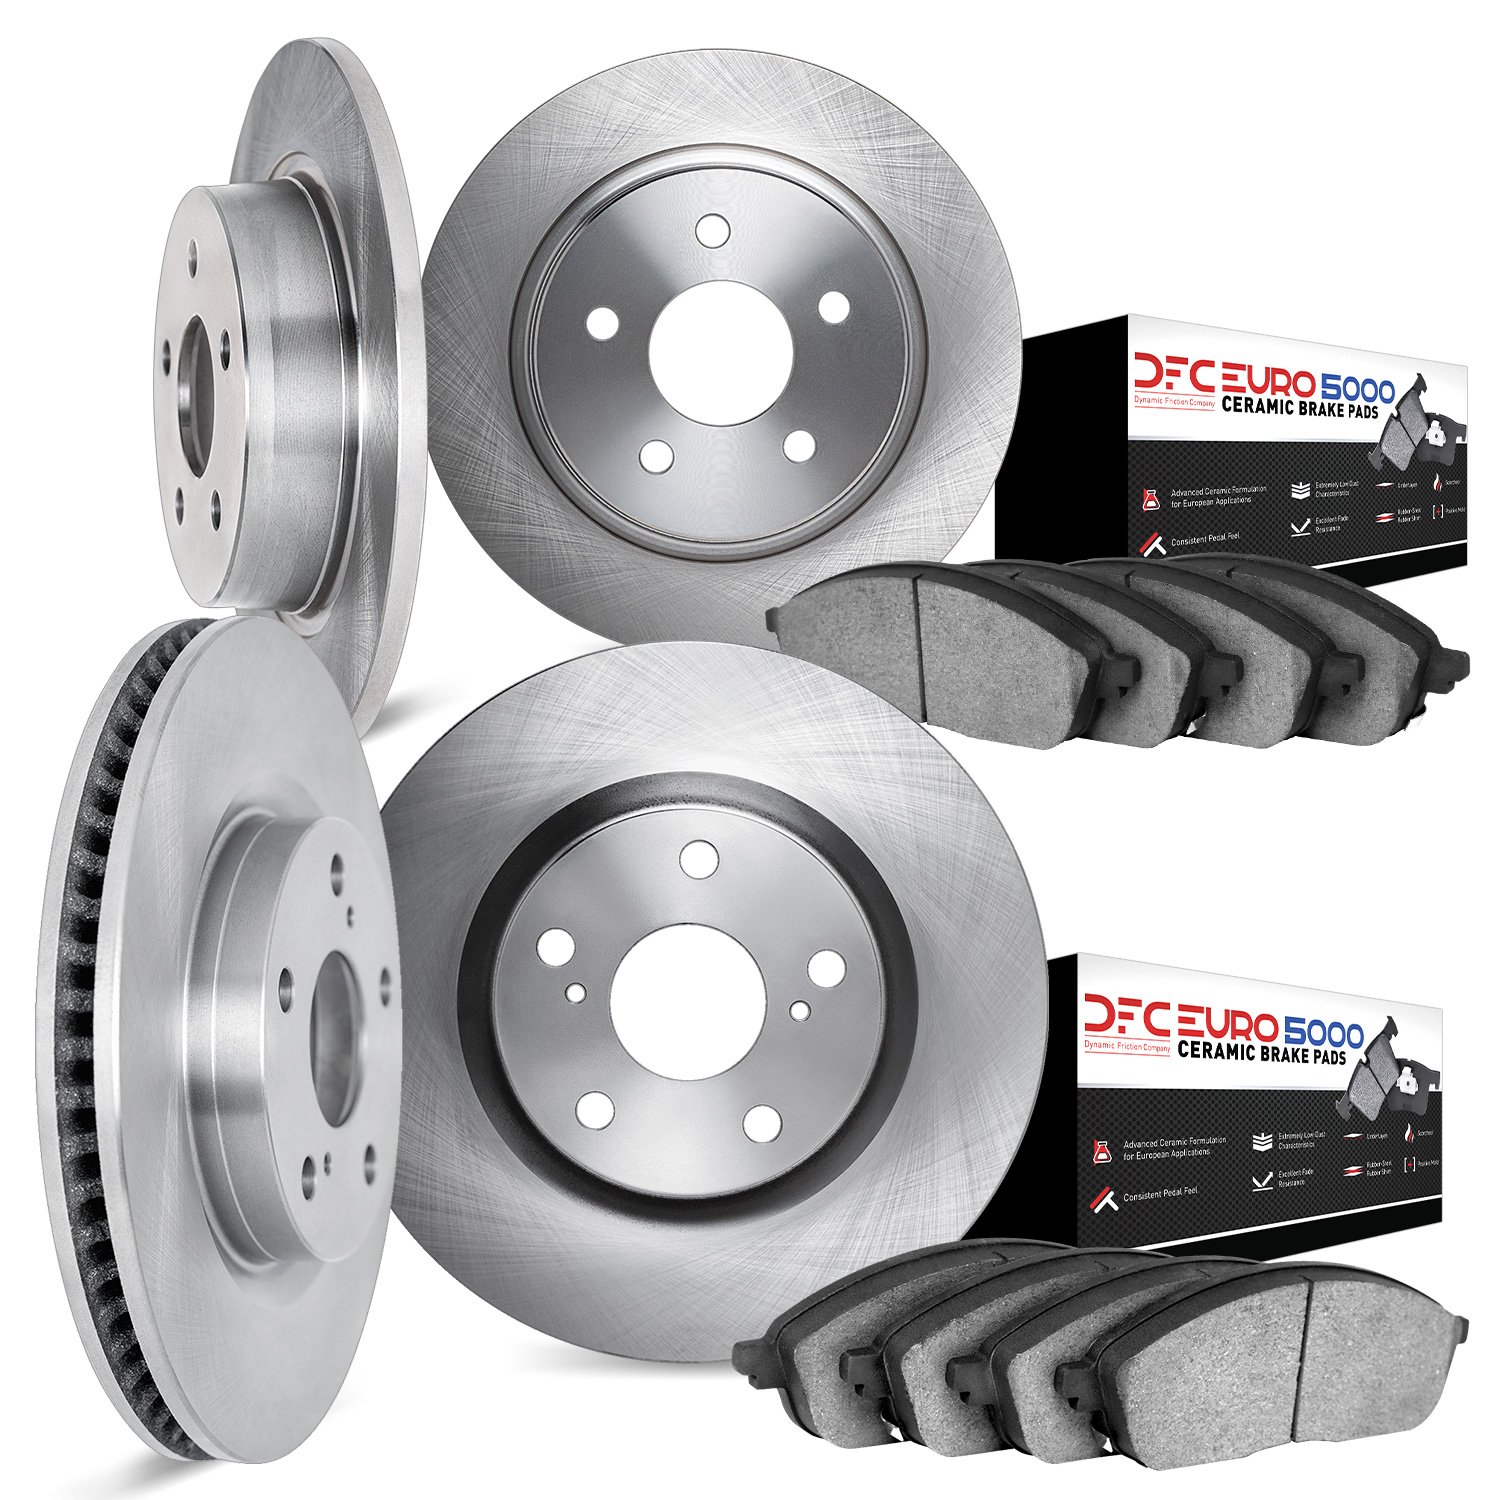 6604-31002 Brake Rotors w/5000 Euro Ceramic Brake Pads, 1982-1989 BMW, Position: Front and Rear